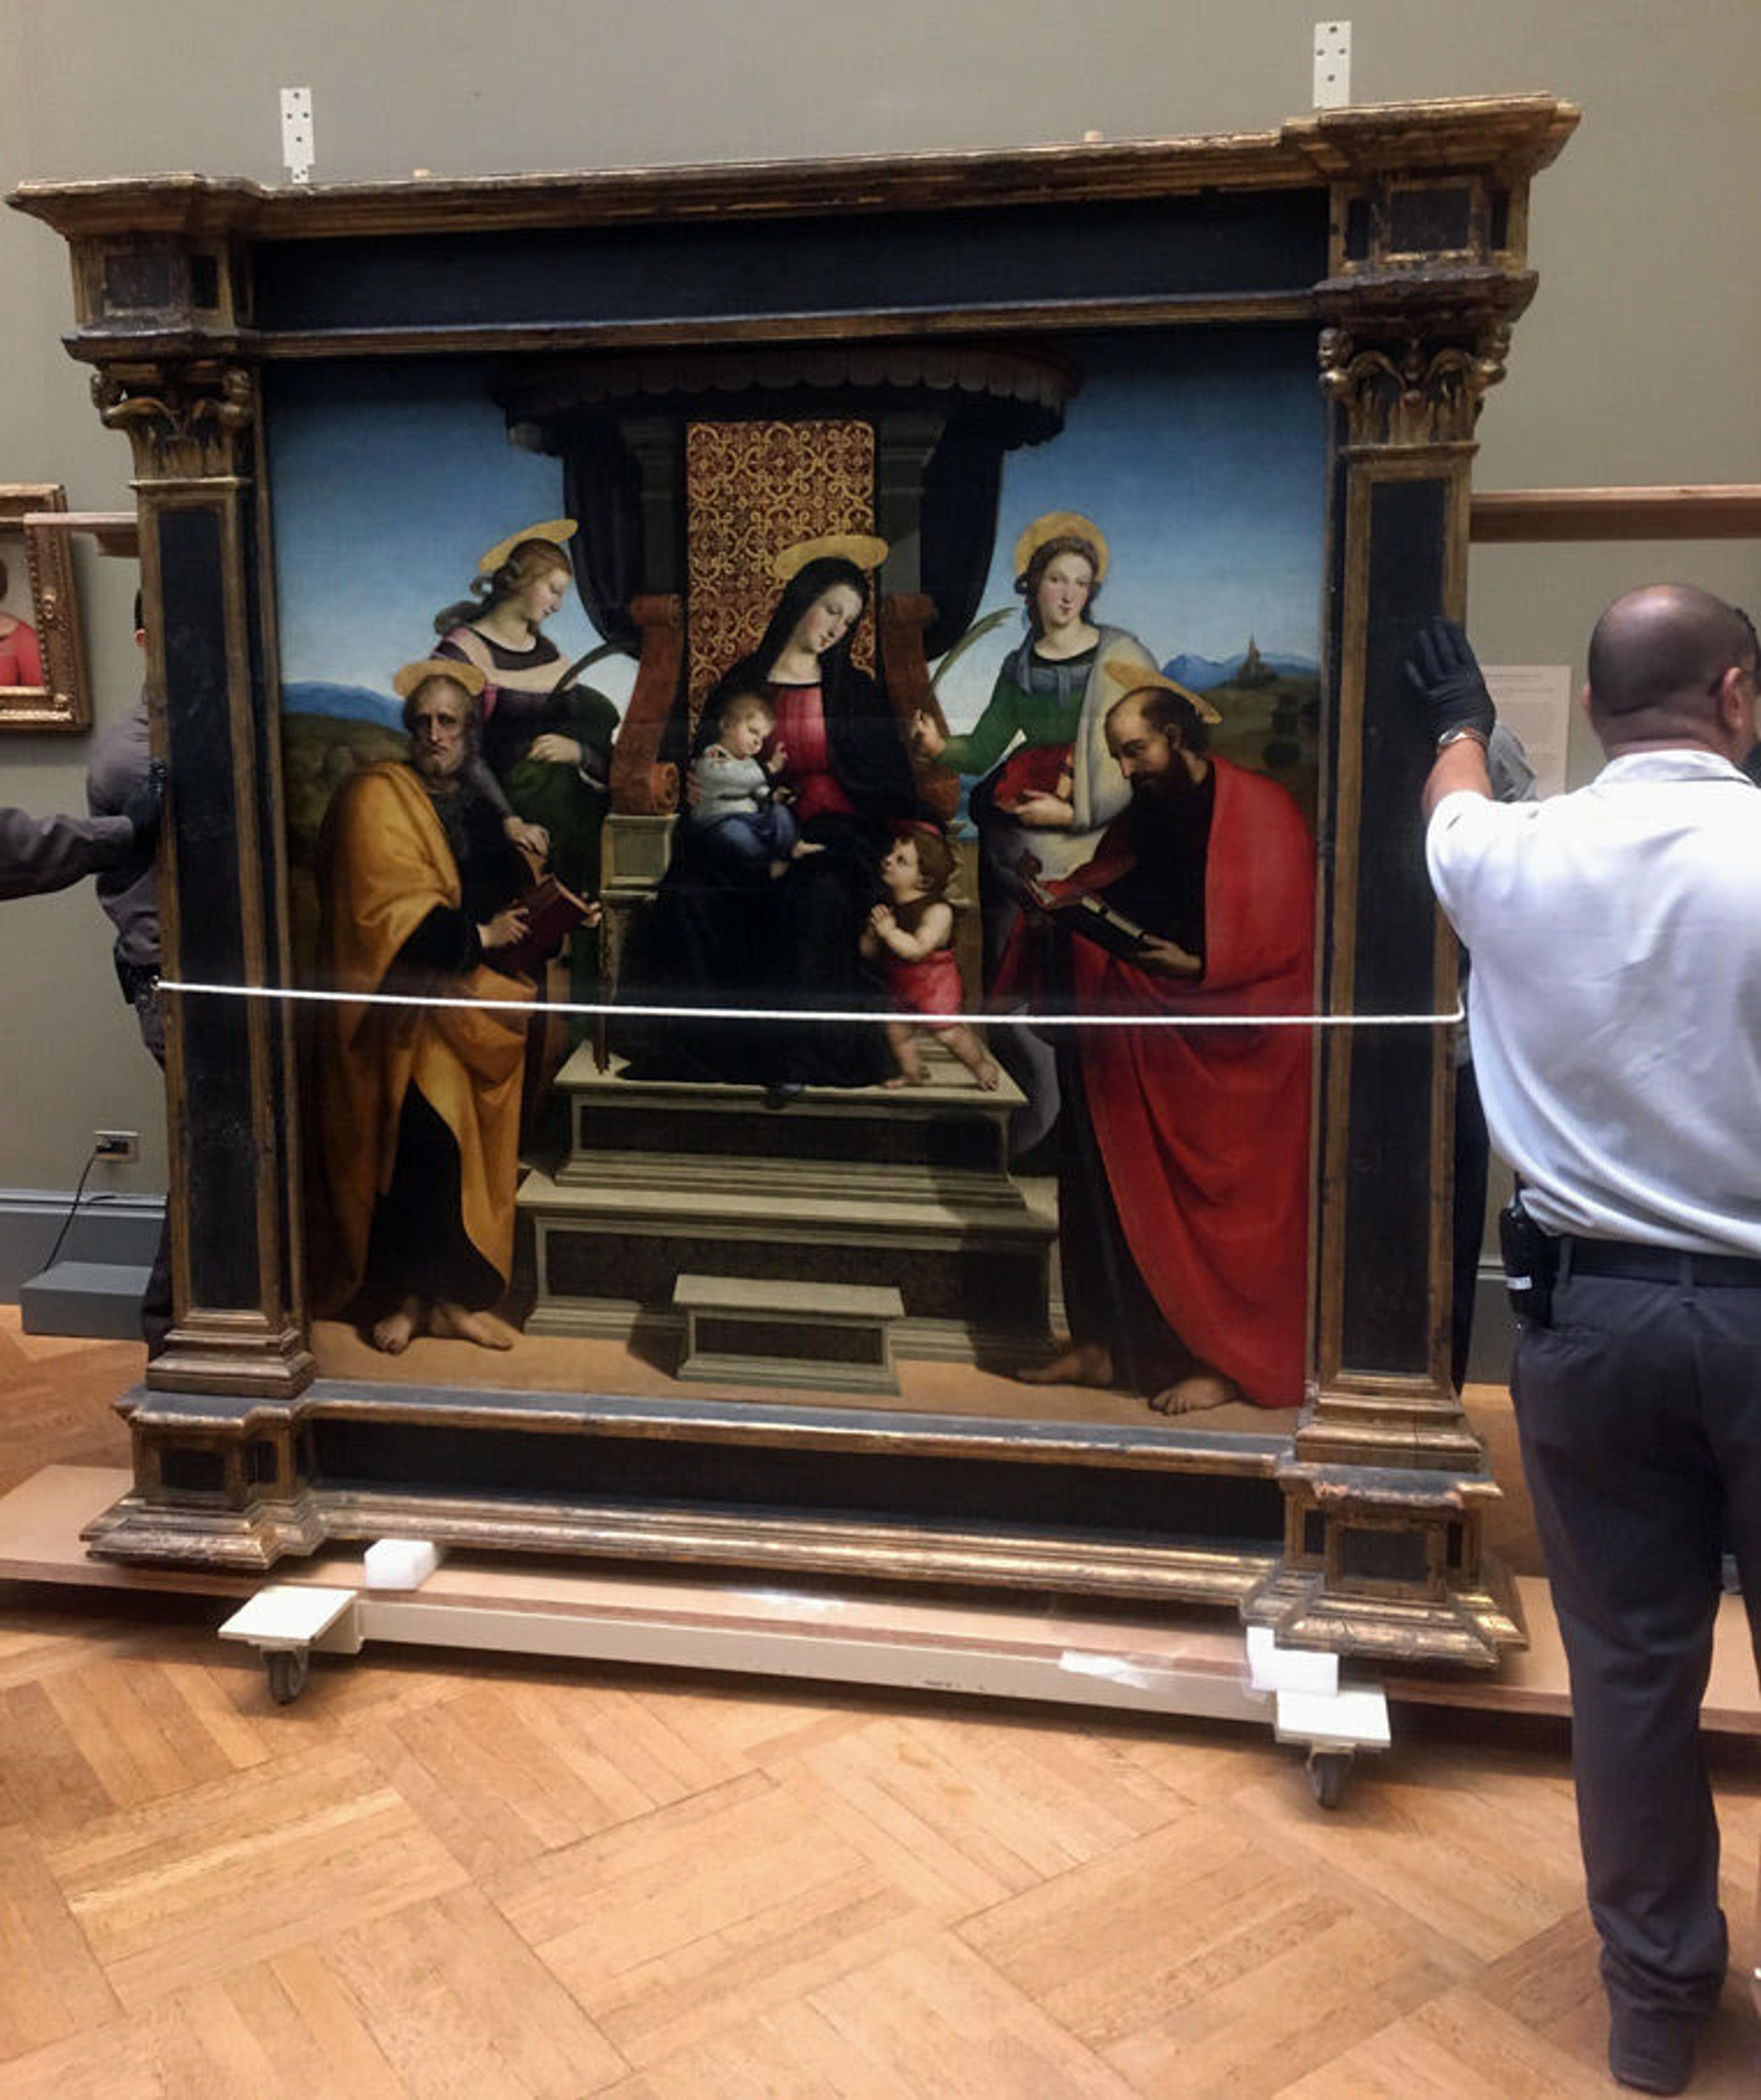 The altarpiece by Raphael is ready to transport to a new gallery location